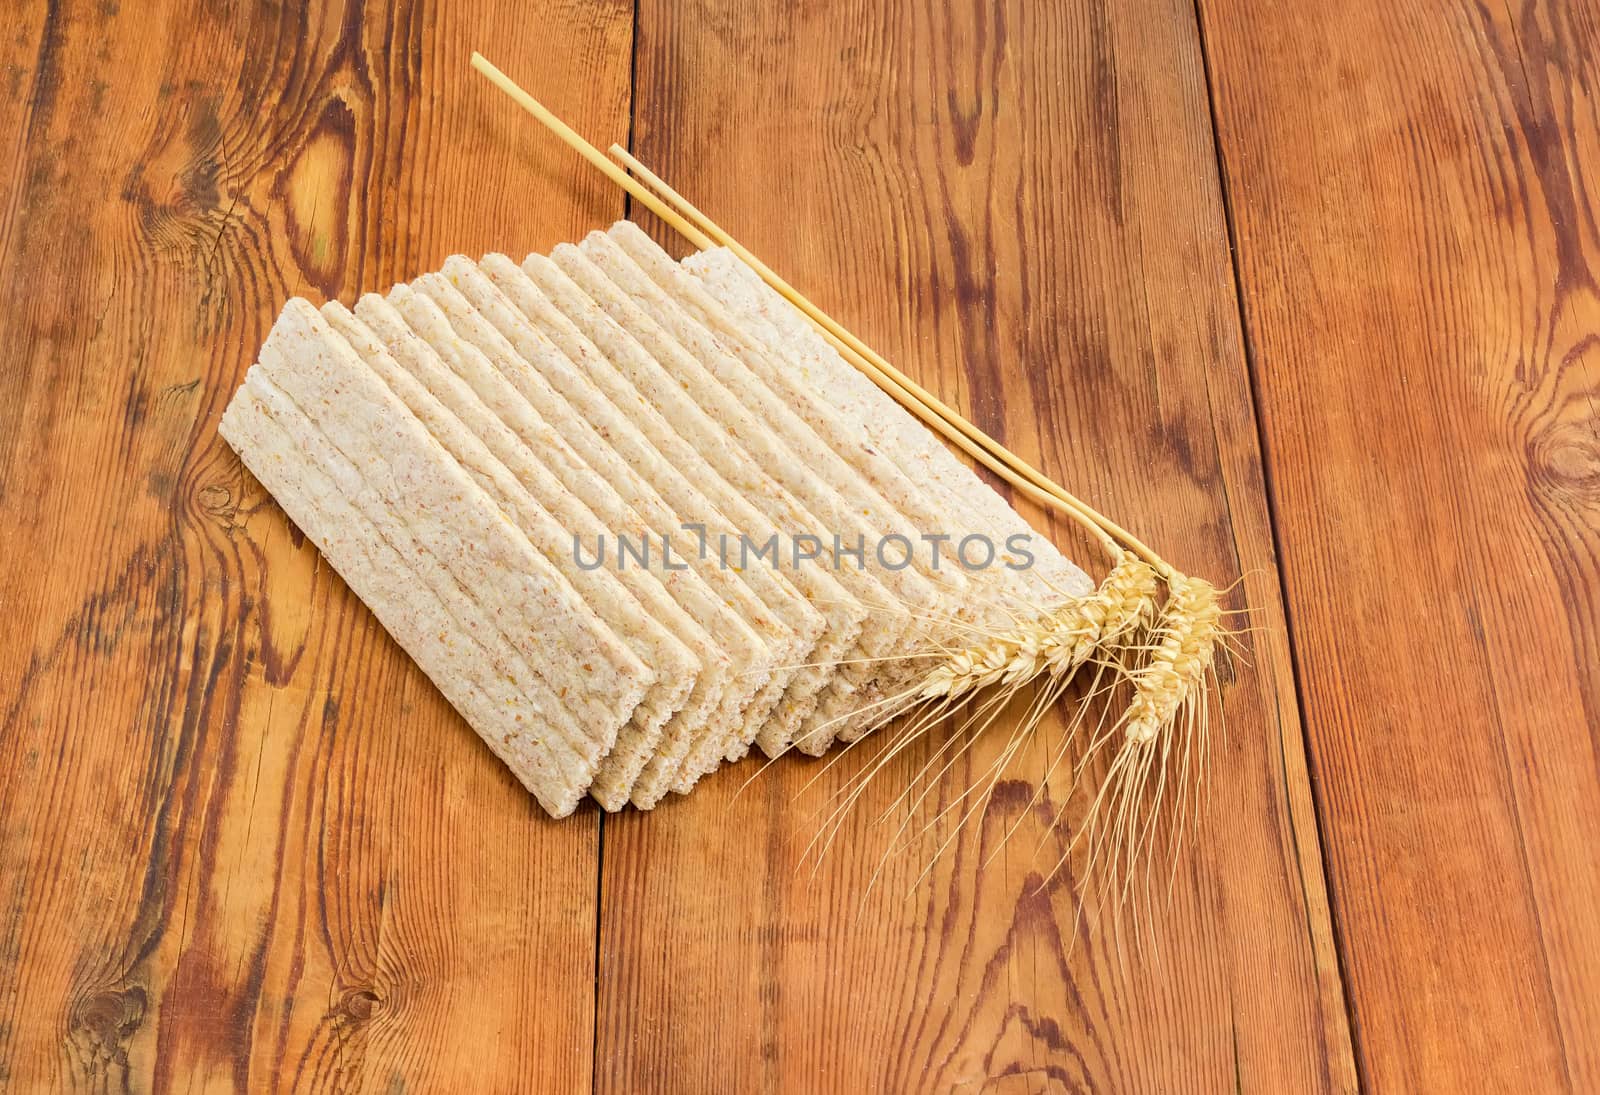 Dietary wheat wholegrain crispbread with adding a buckwheat and a barley and two wheat spikes on a surface of an old wooden planks
